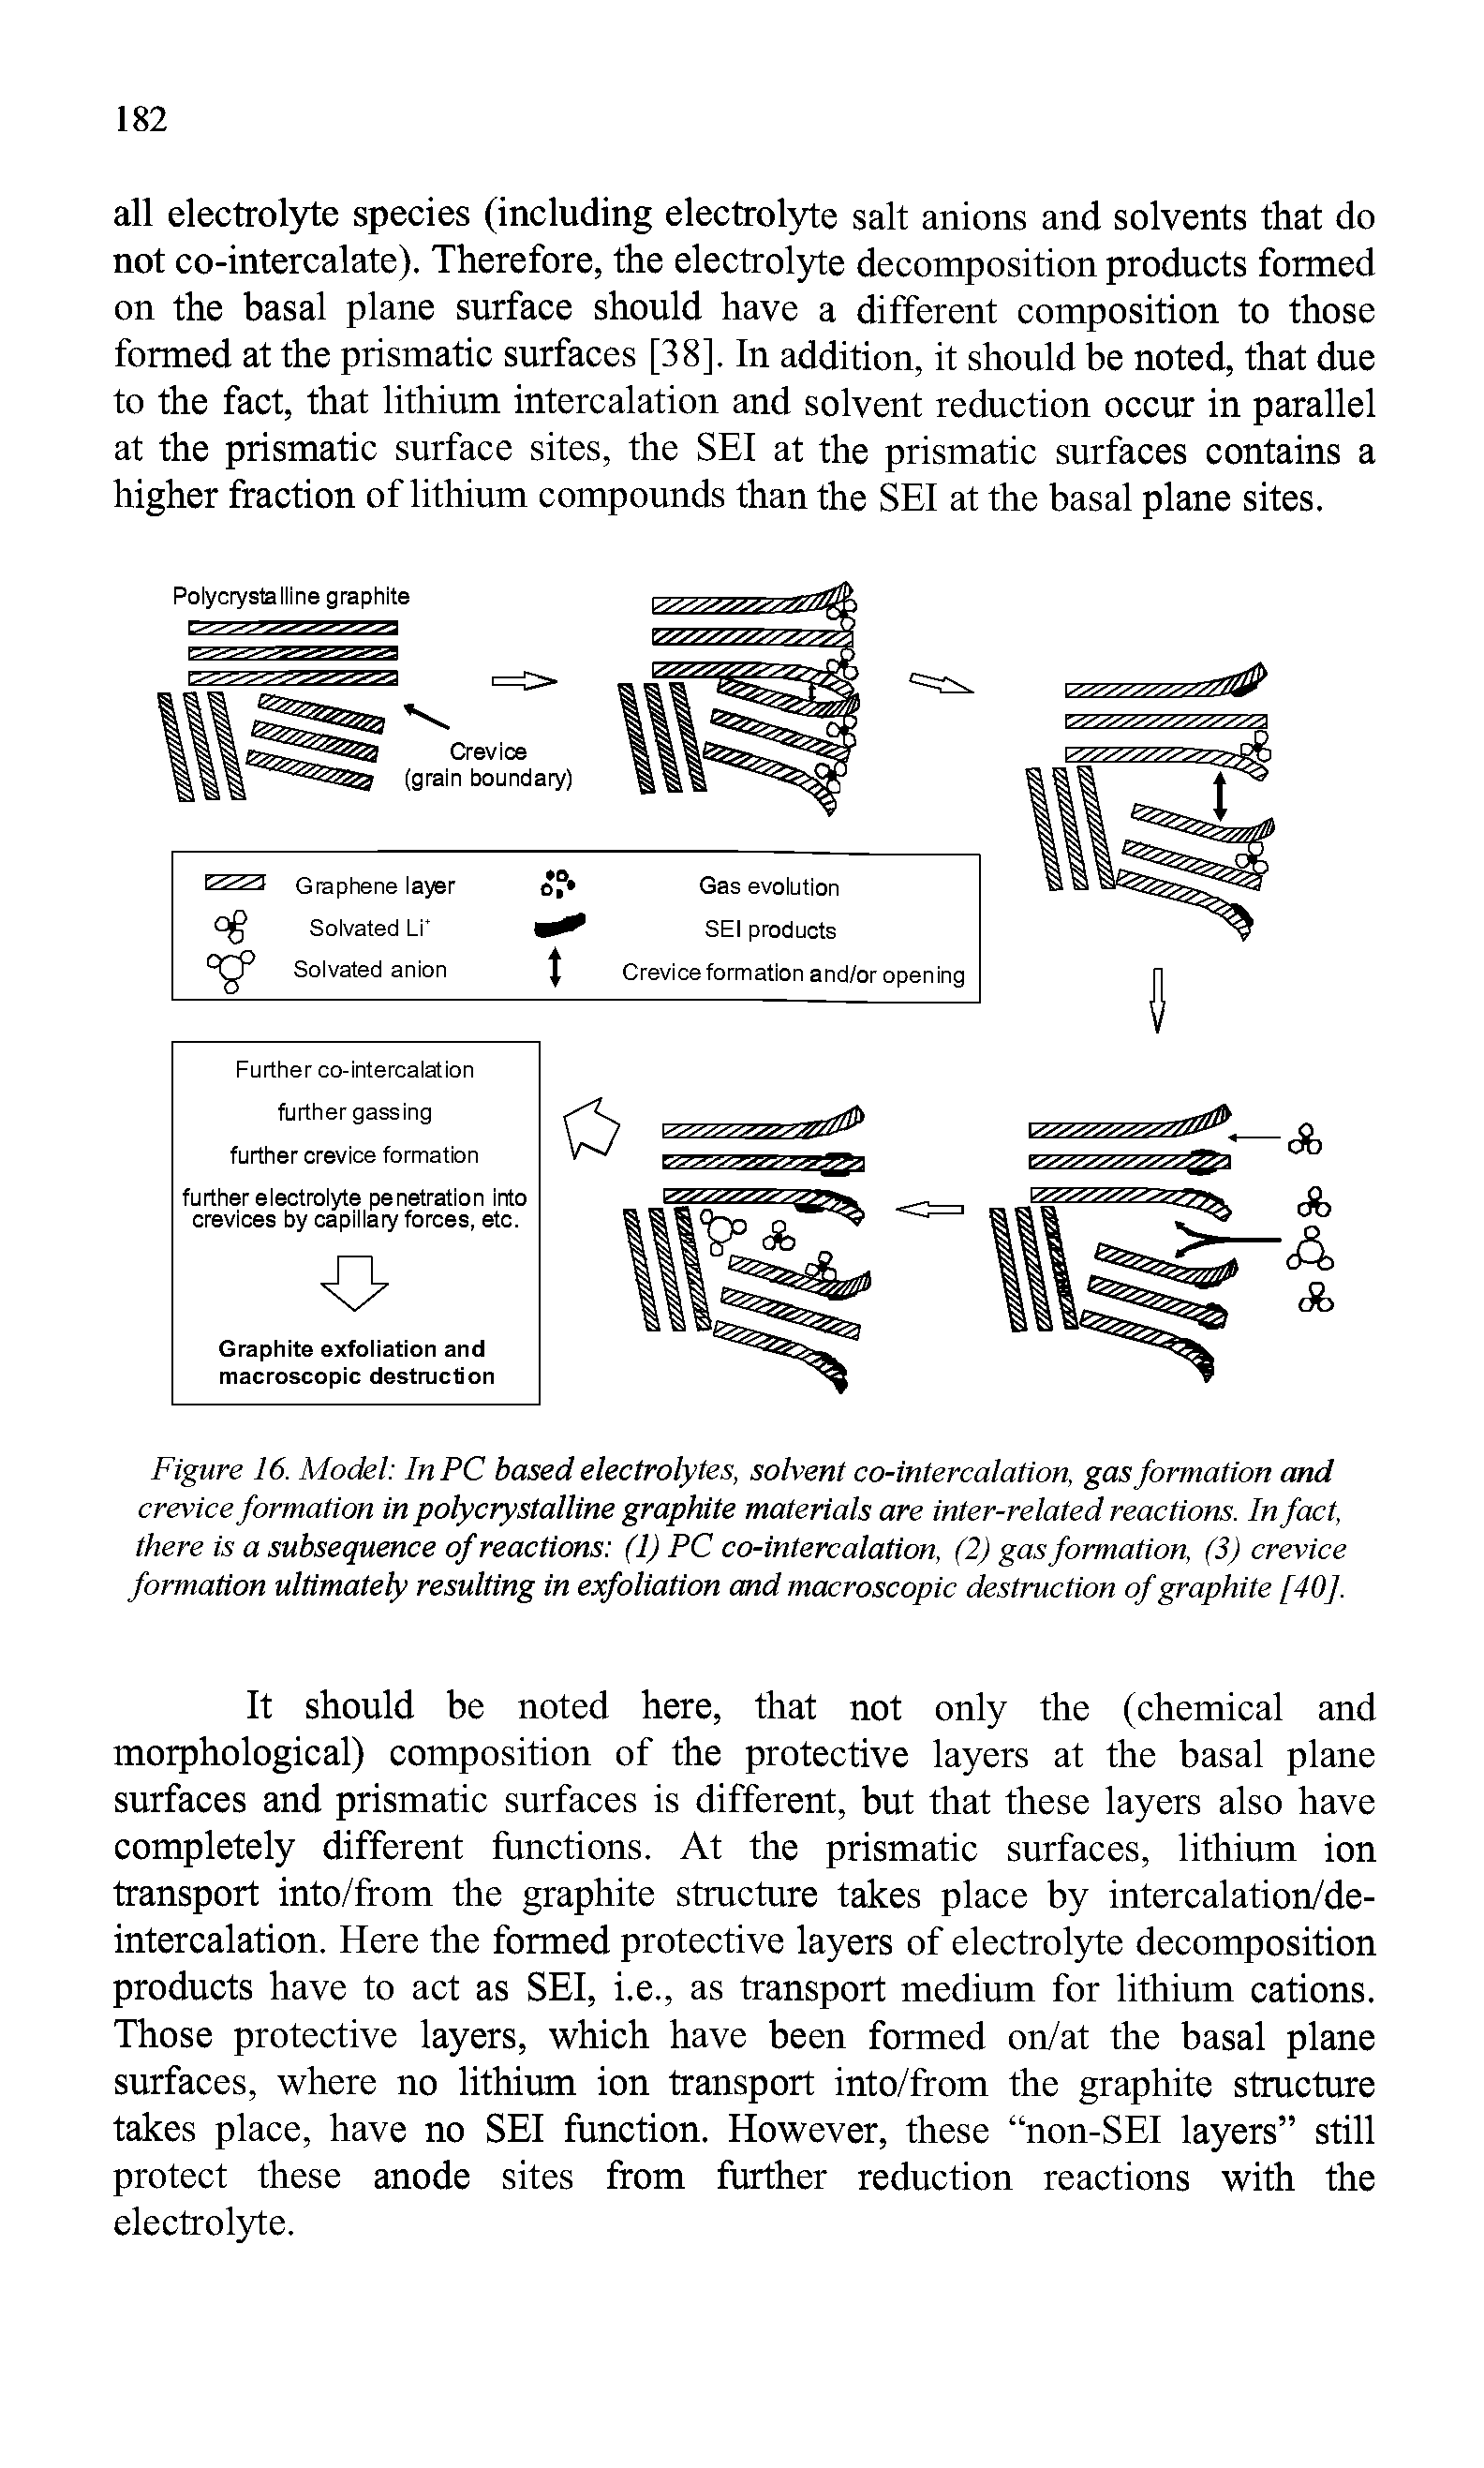 Figure 16. Model In PC based electrolytes, solvent co-intercalation, gas formation and crevice formation in polycrystalline graphite materials are inter-related reactions. In fact, there is a subsequence of reactions (1) PC co-intercalation, (2) gas formation, (3) crevice formation ultimately resulting in exfoliation and macroscopic destruction of graphite [40],...